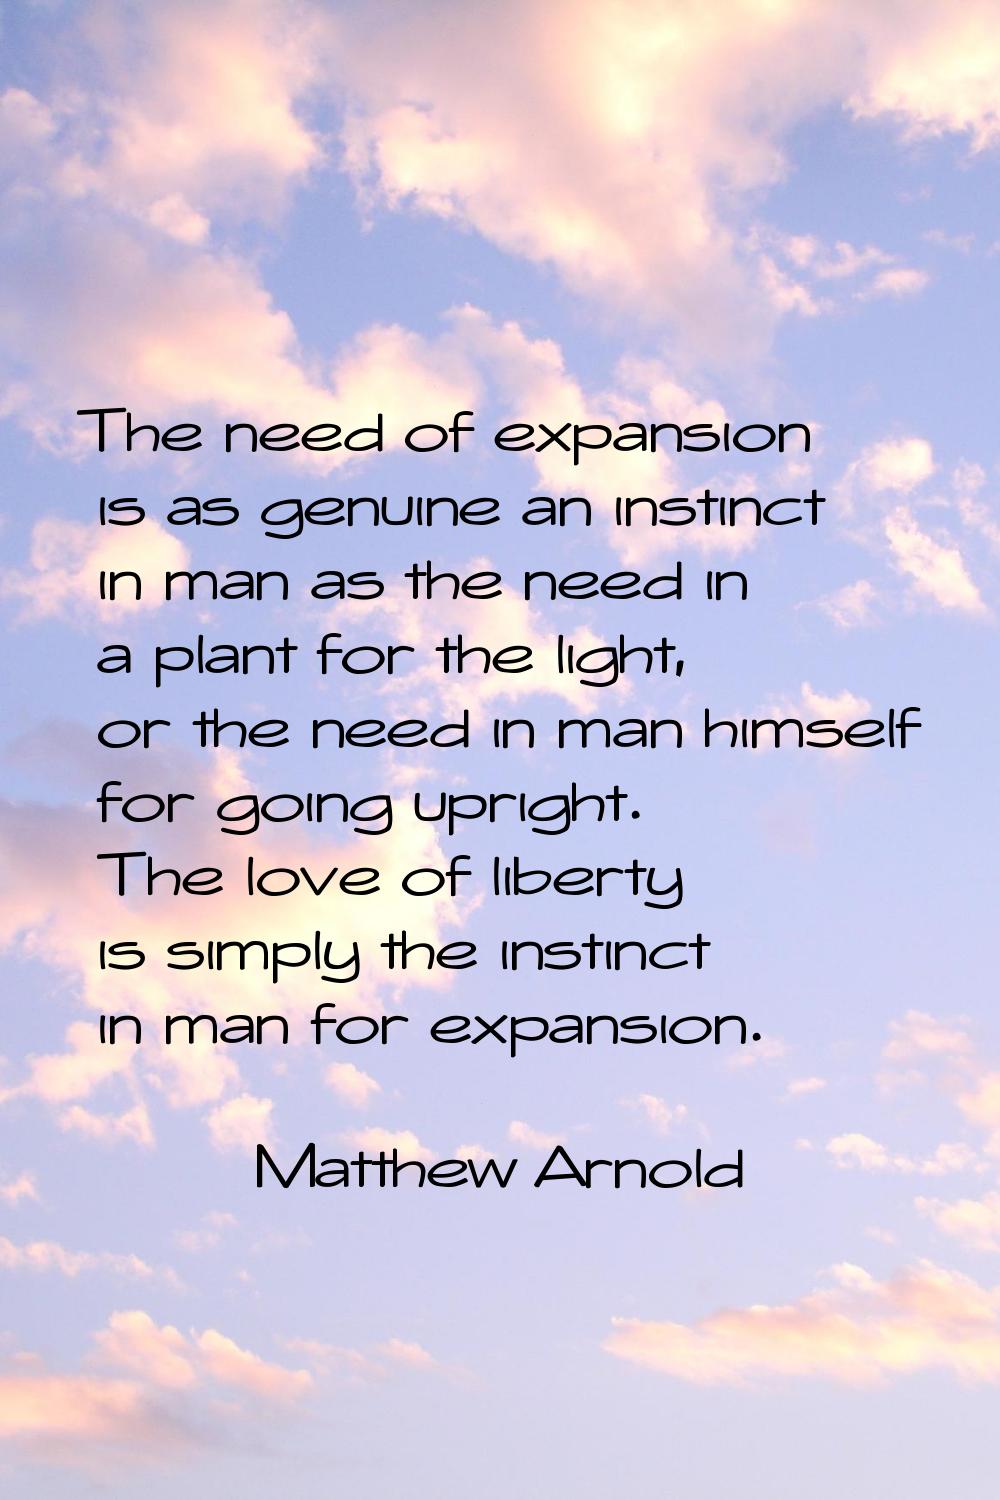 The need of expansion is as genuine an instinct in man as the need in a plant for the light, or the